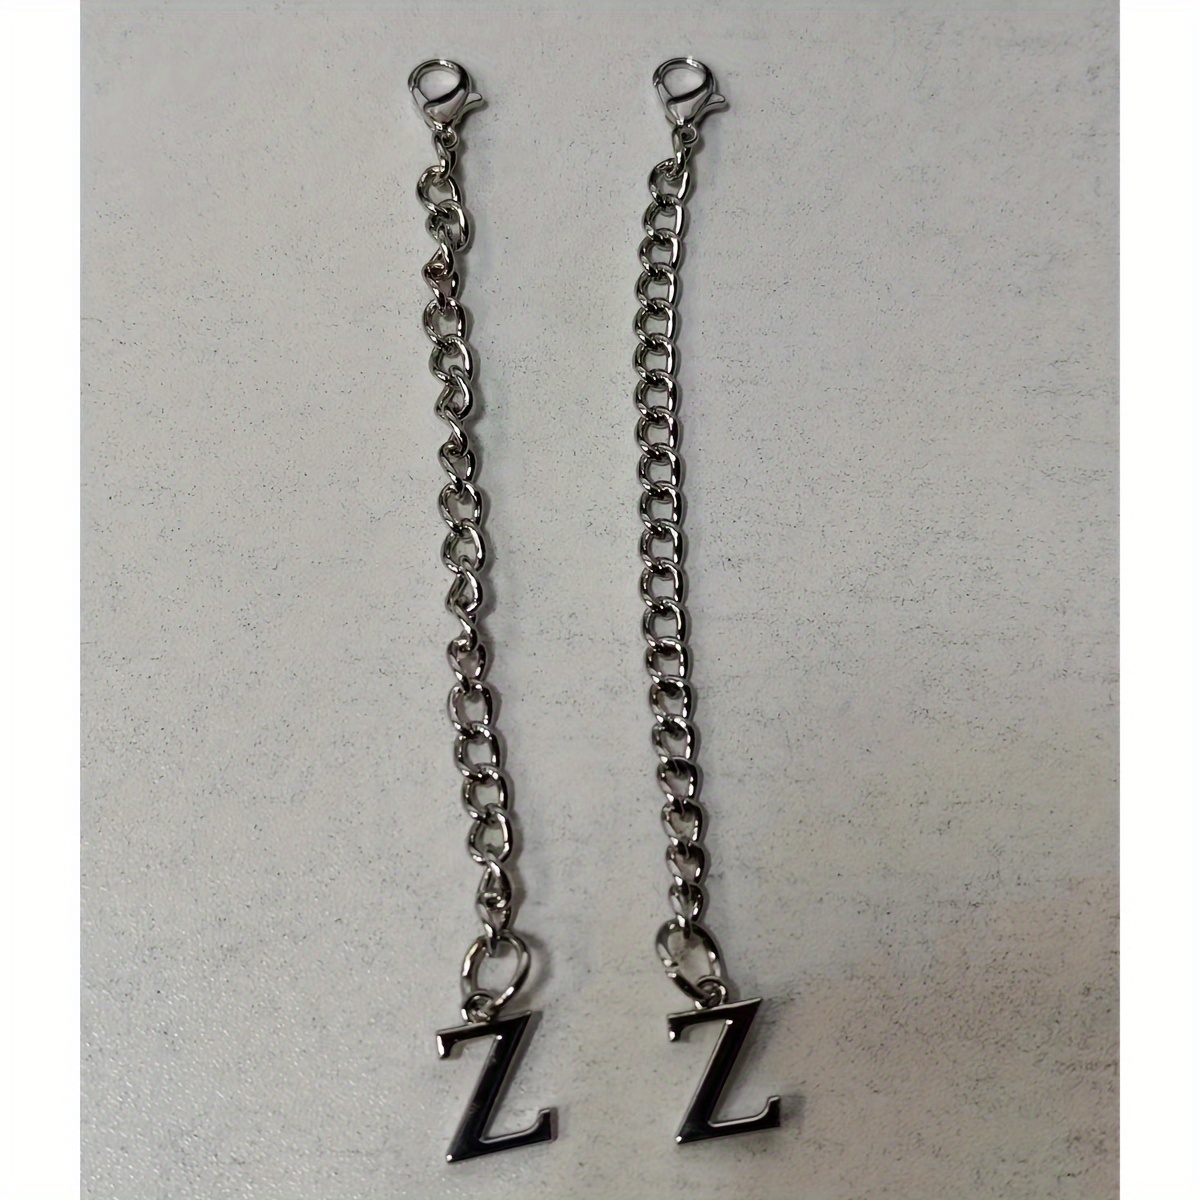  2PC Stanley Cup Charms,26 Letter Charm Stanley Cup